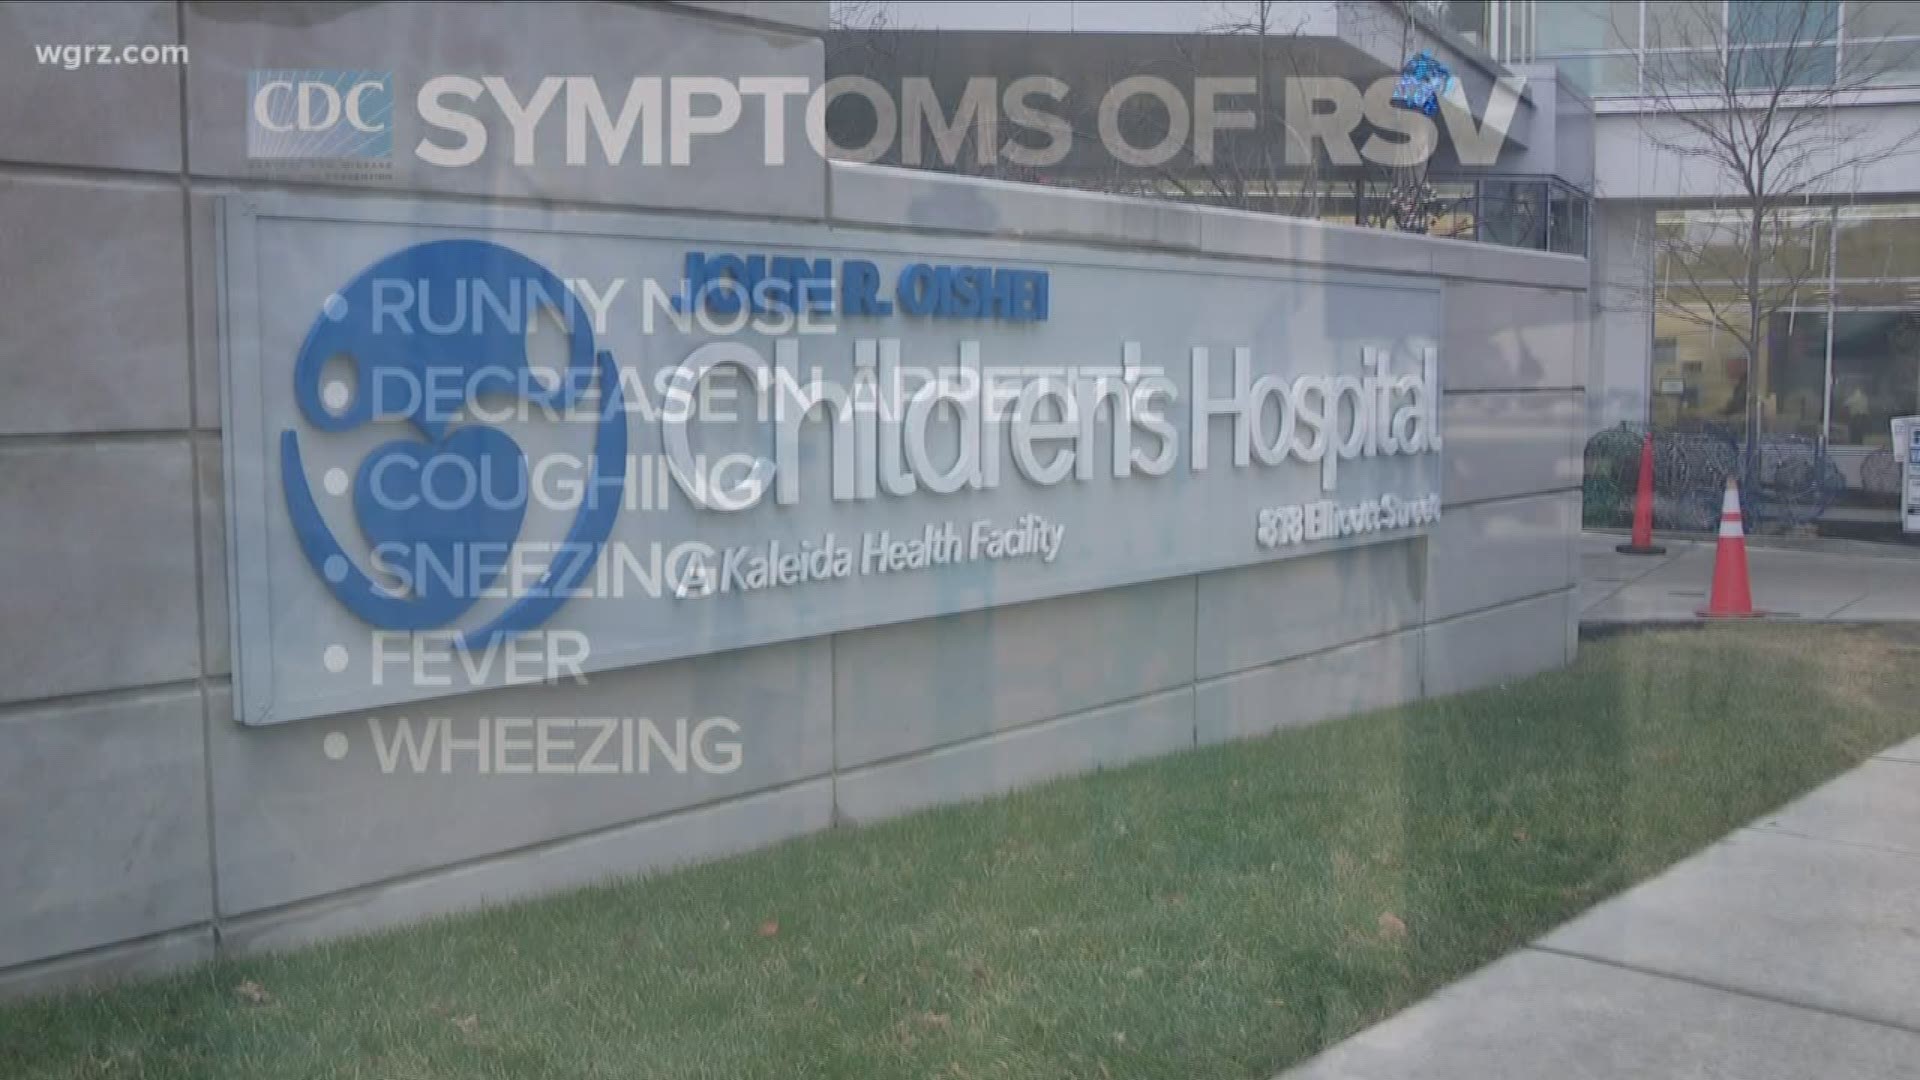 Doctors at Oishei Children's hospital say they've seen an increasing number of cases over the last few weeks, that the hospital has sometimes been over capacity.